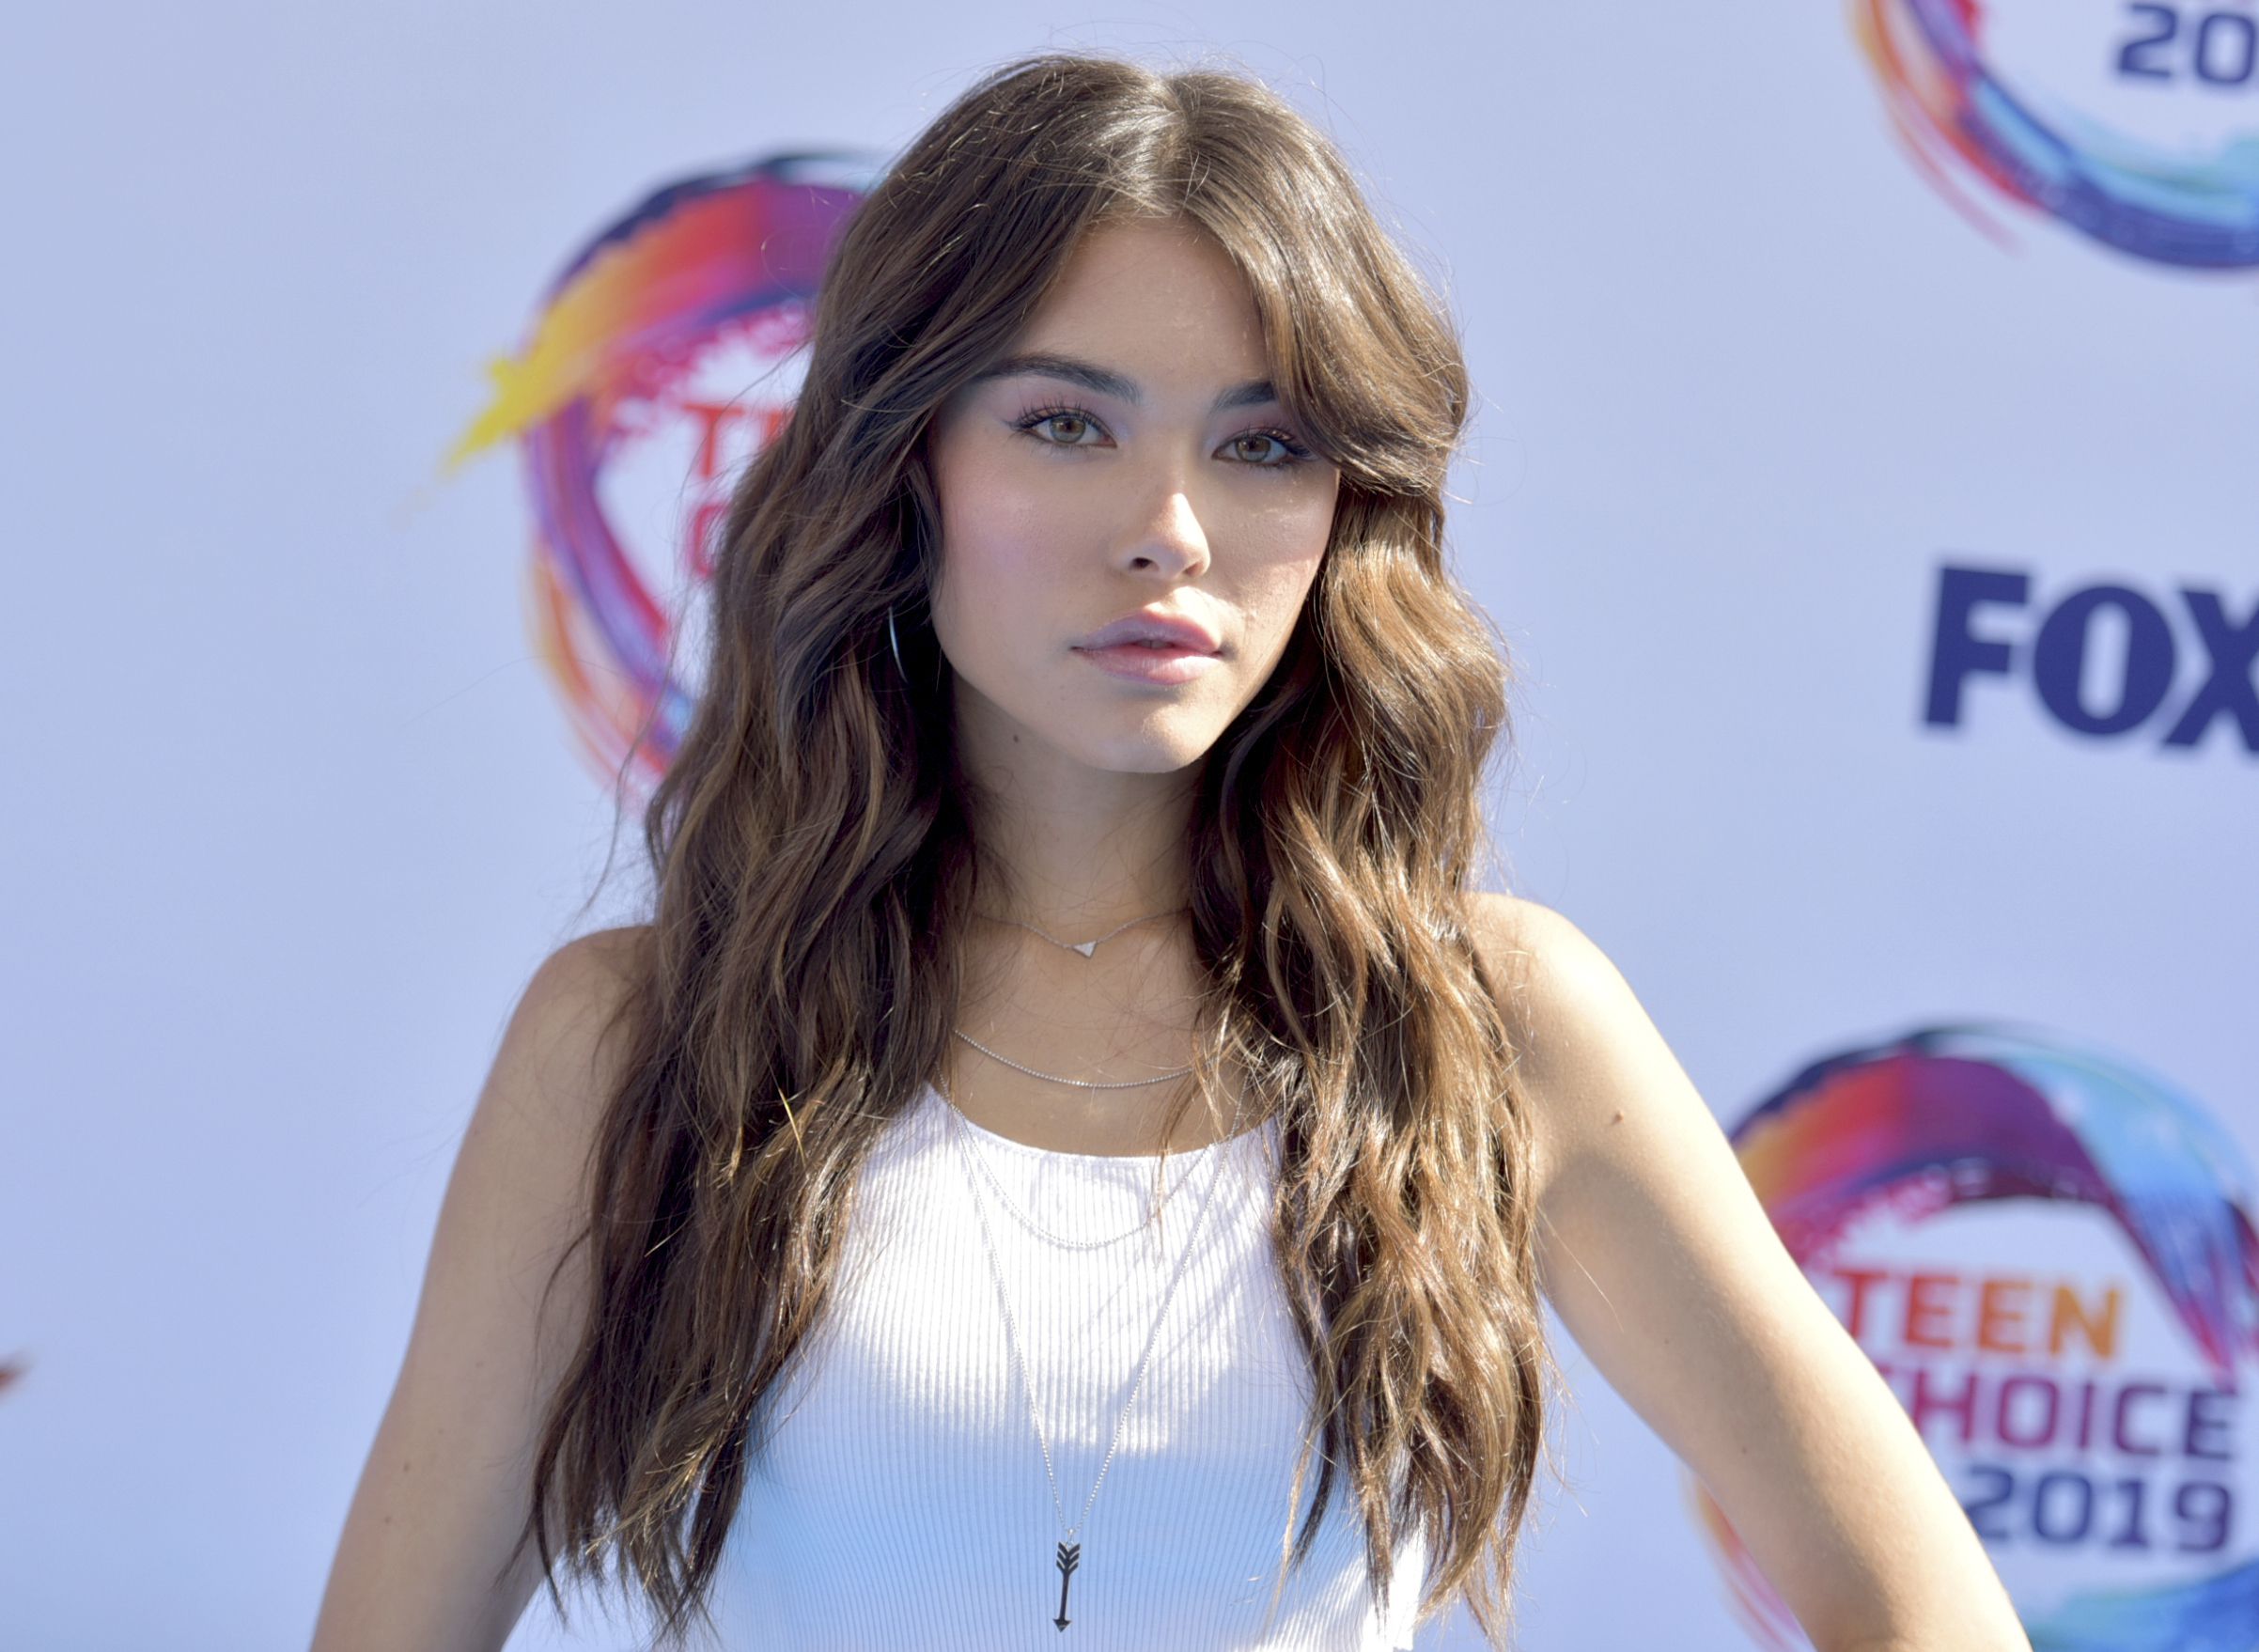 Madison Beer Says She Considered Suicide as a Teen in New Memoir